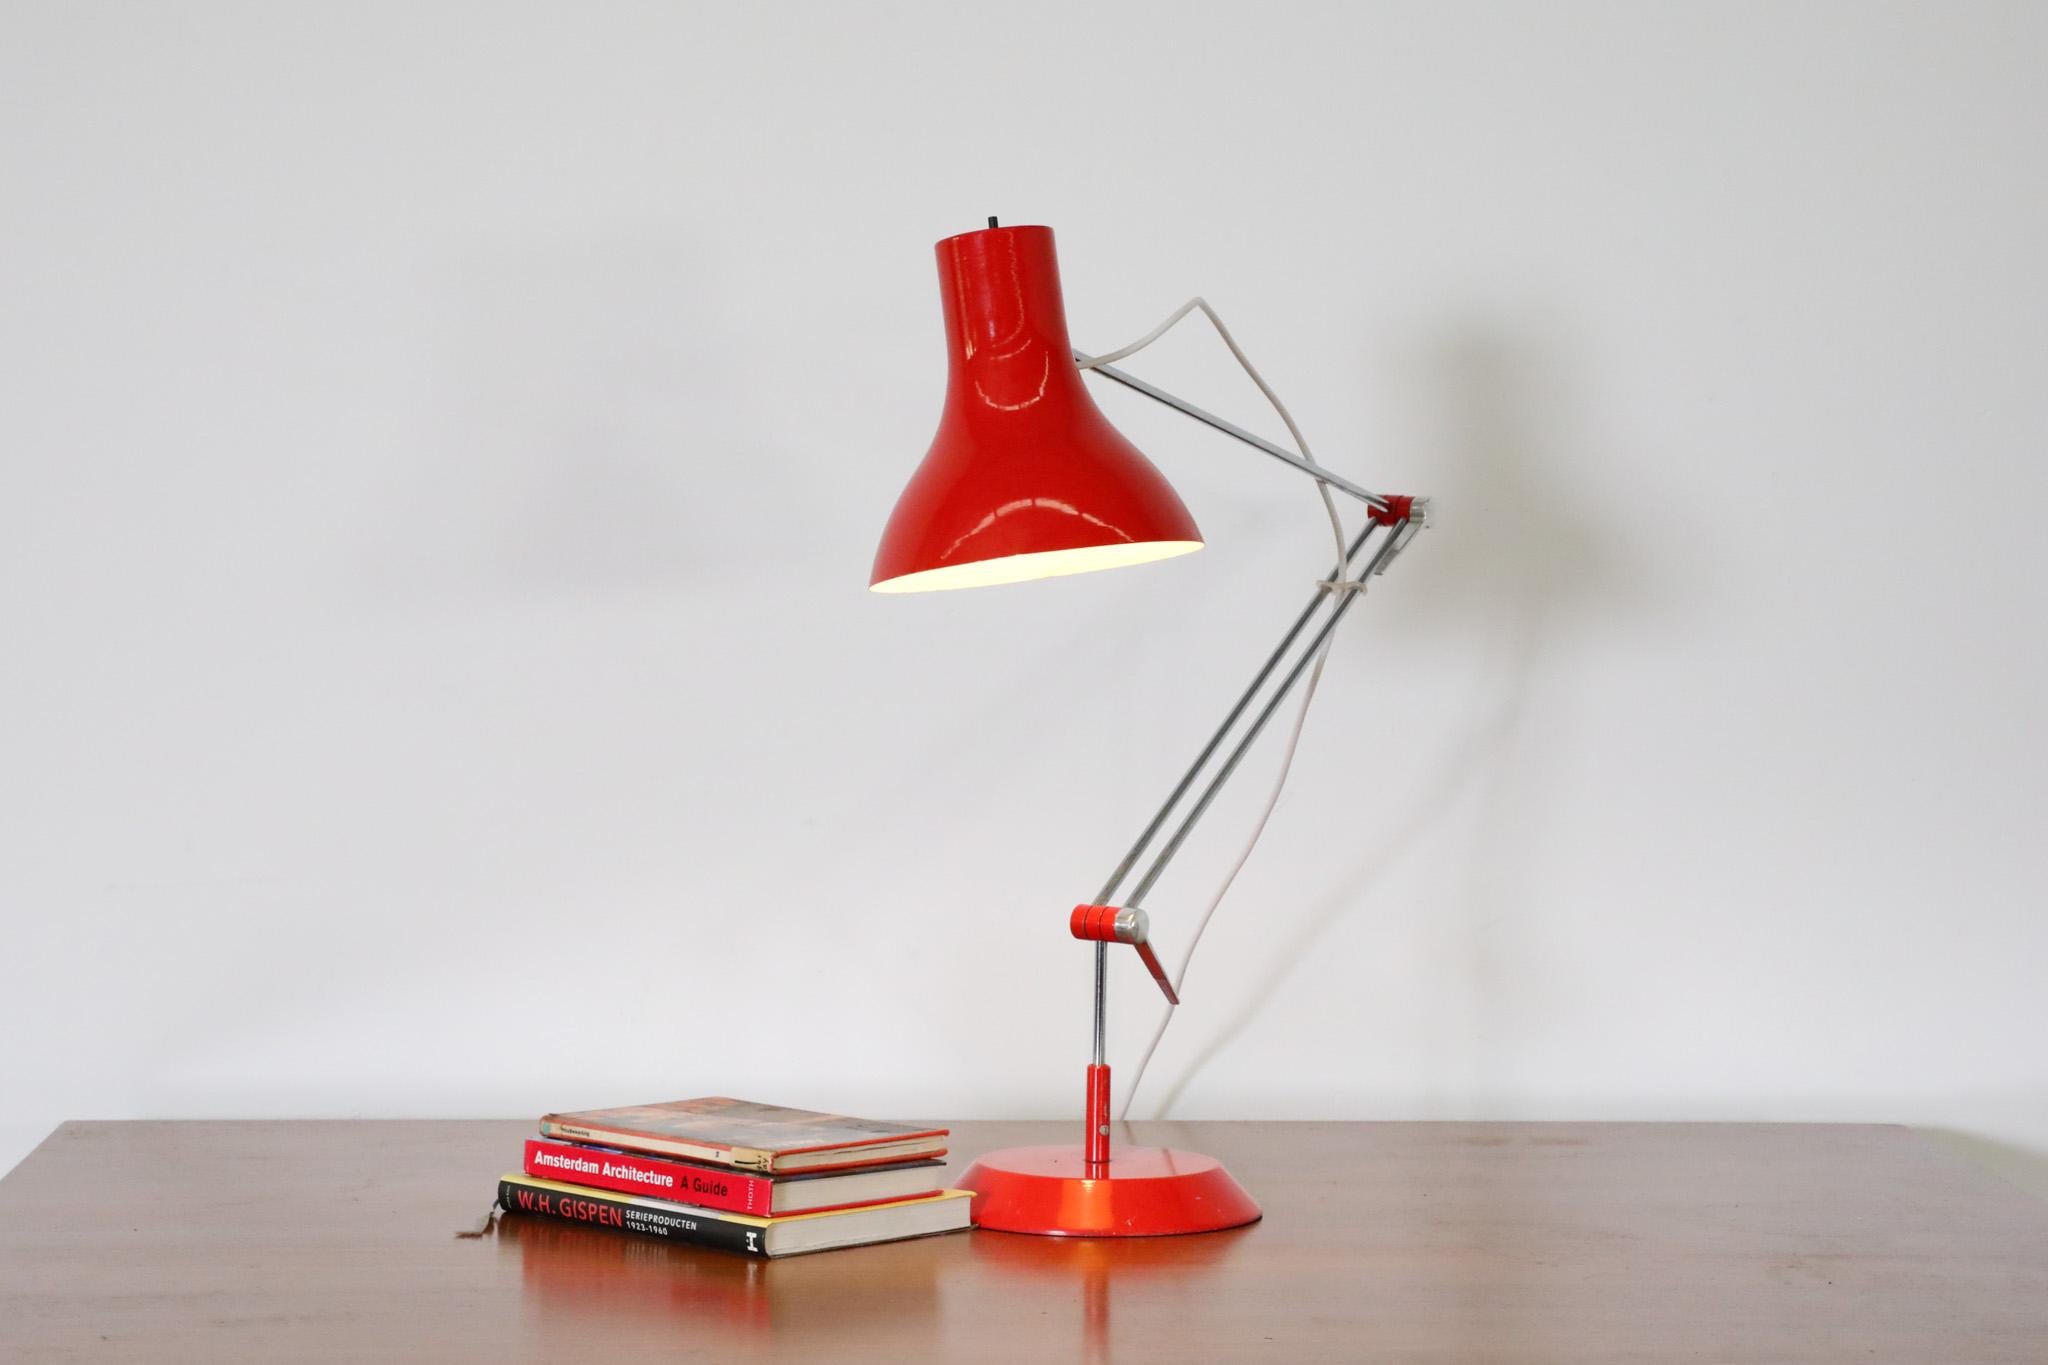 Mid-Century Industrial task lamp by Napako, 1950's. Red enameled aluminum shade on a multi-adjustable chrome stem with a heavy weighted metal base. A well dressed table lamp perfect for adding directional light to a desk or side table. In original